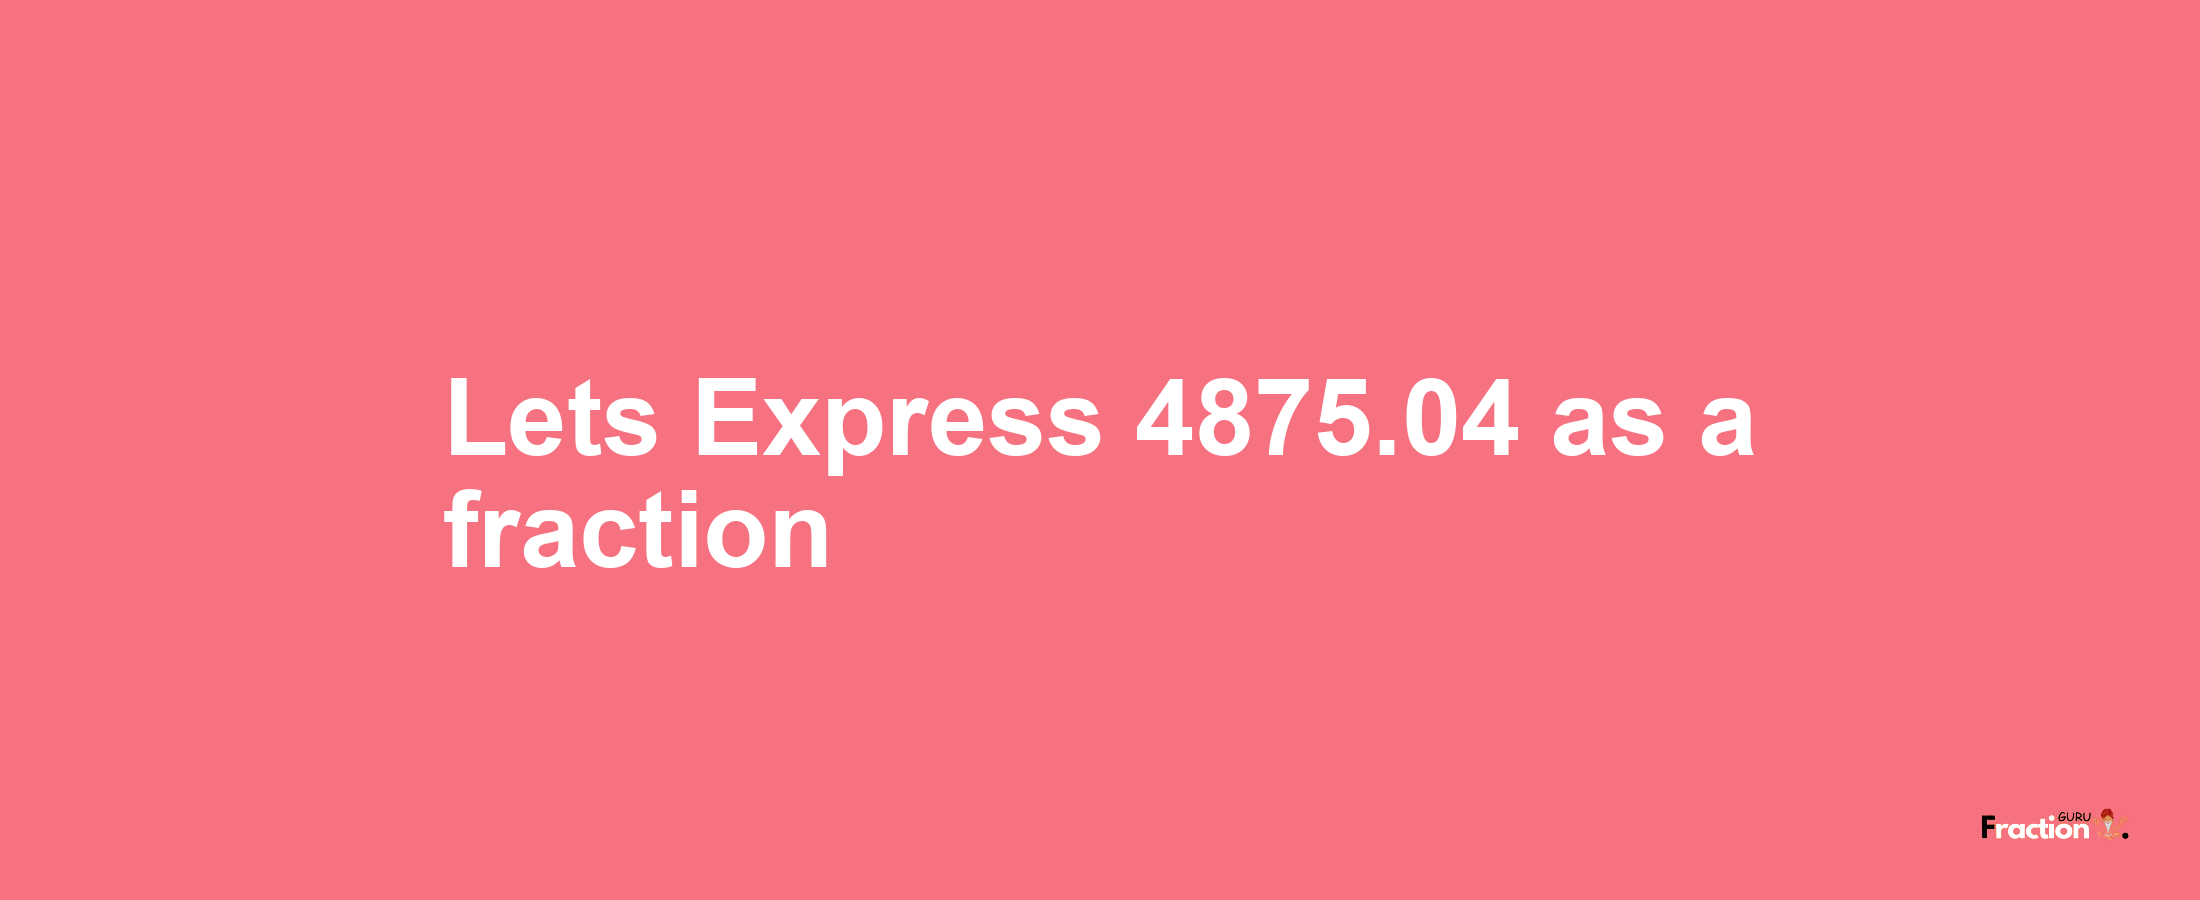 Lets Express 4875.04 as afraction